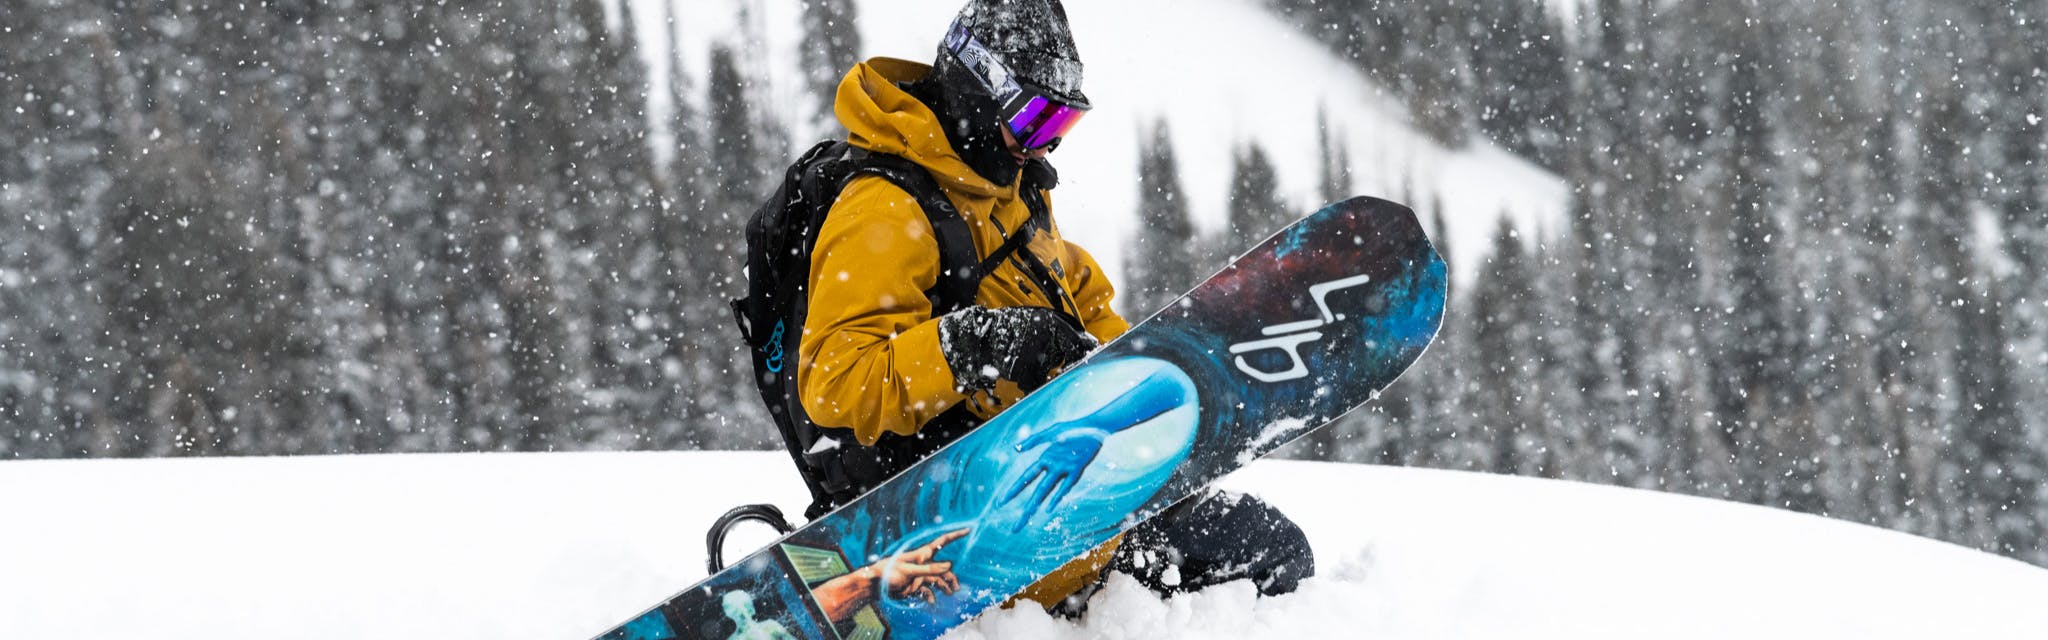 Someone kneels in the snow with their snowboard.